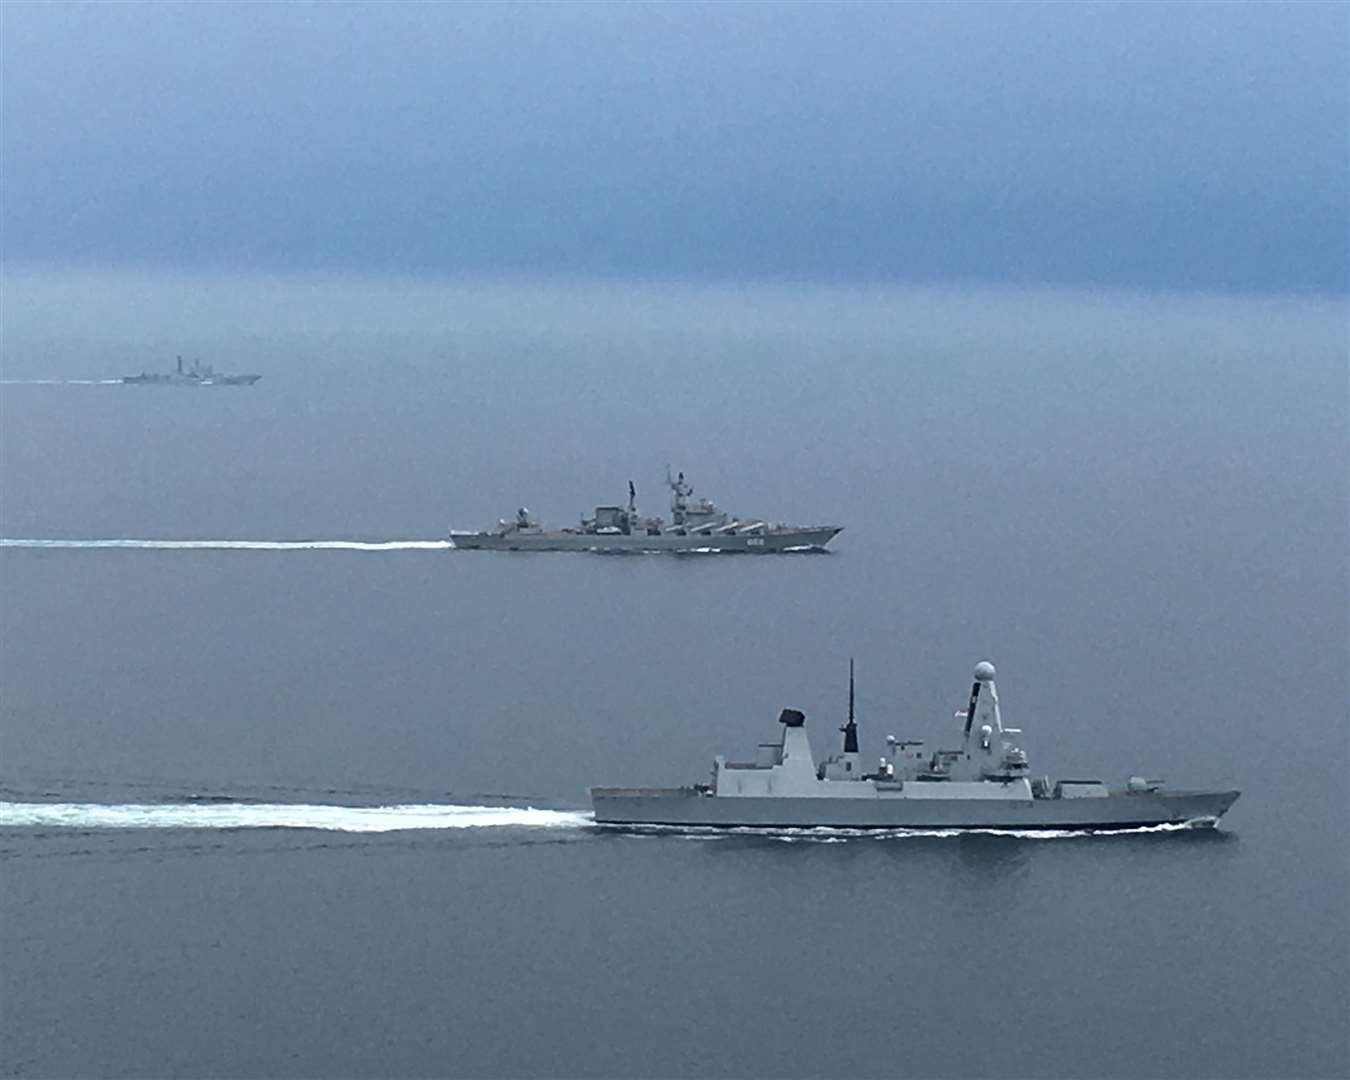 The destroyer HMS Diamond shadowed two Russian warships overnight as they passed through the English Channel. Picture: Crown copyright 2018